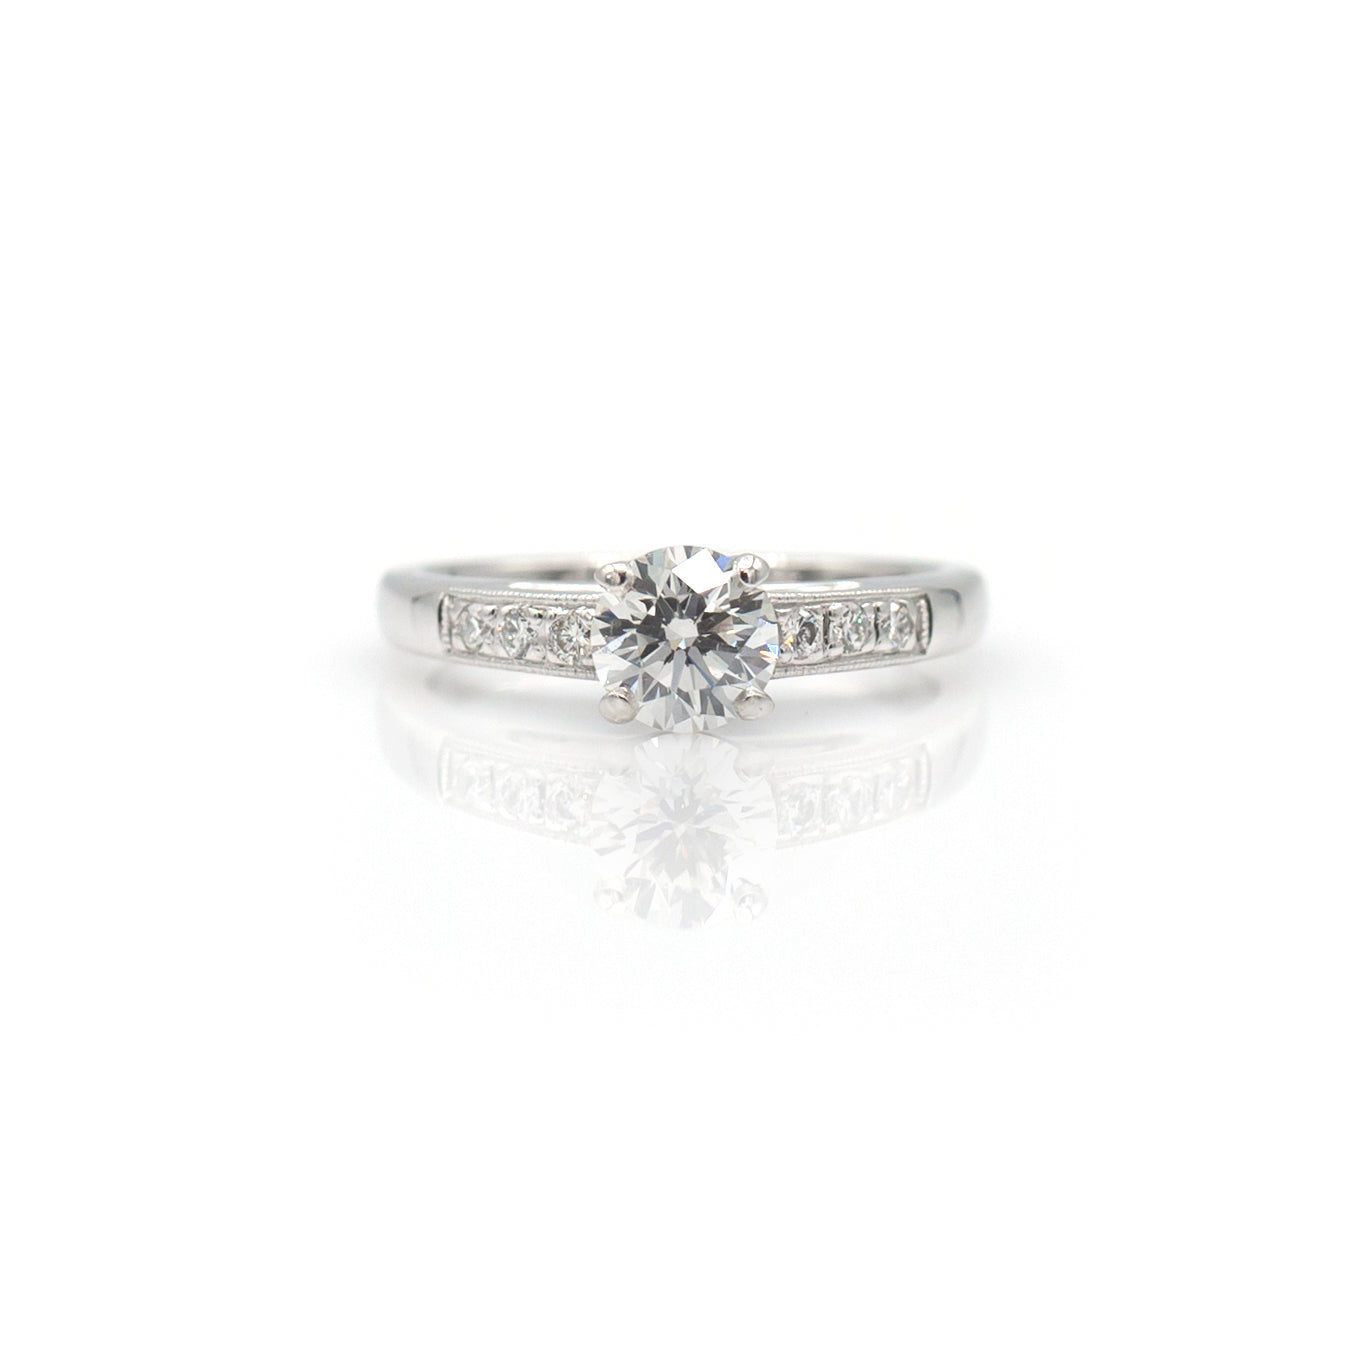 14K White Gold Cathedral Style Diamond Engagement Ring